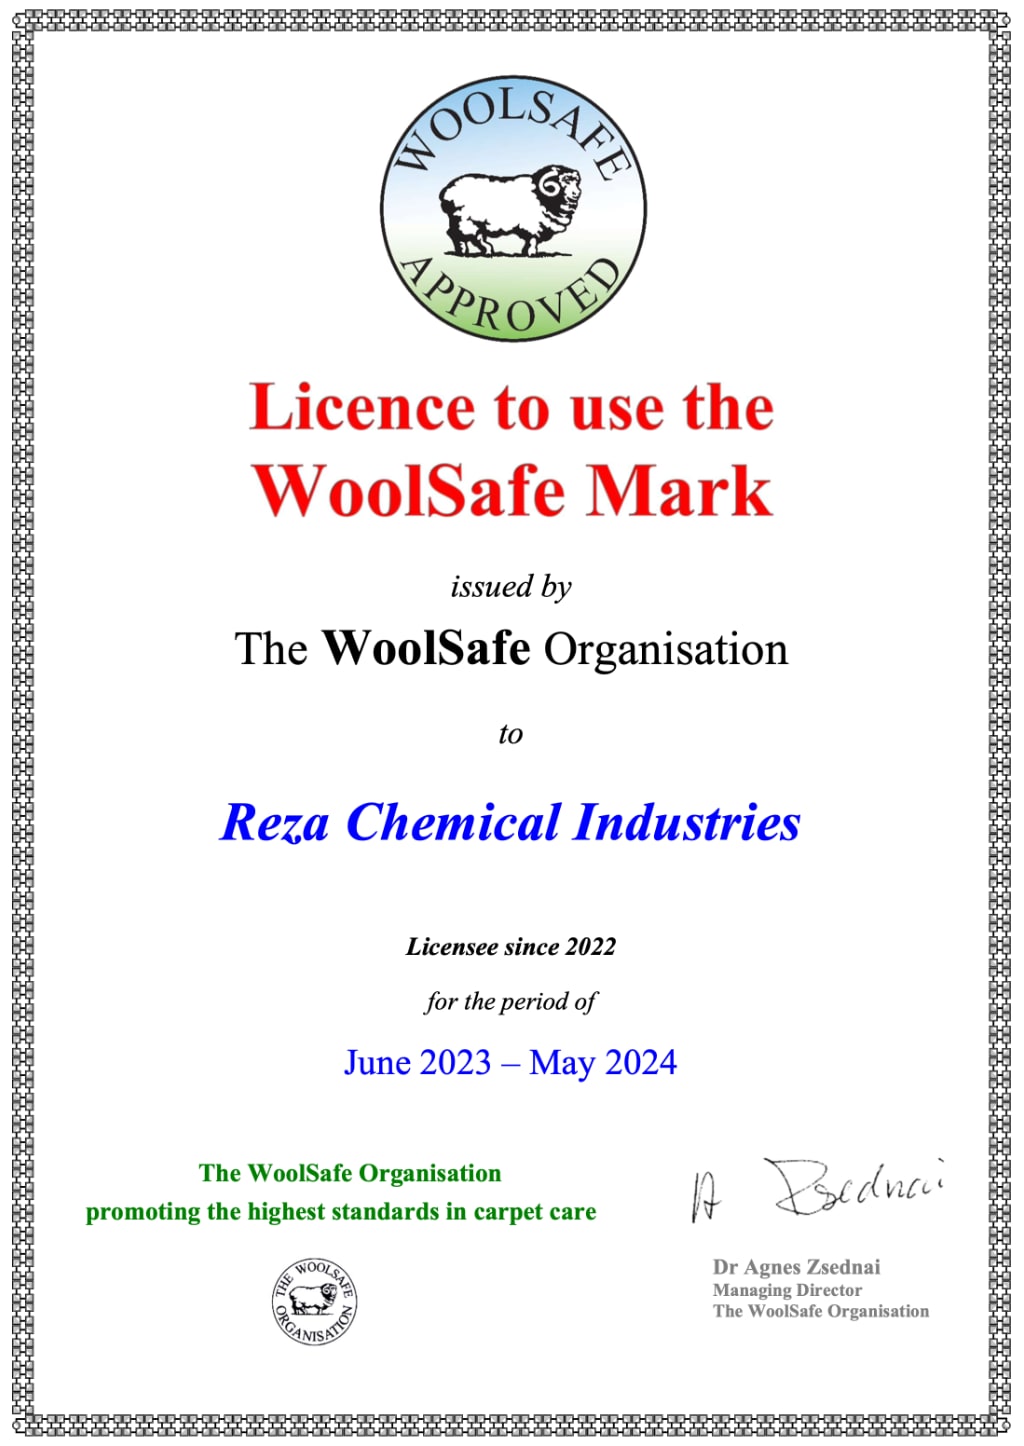 WoolSafe Licence 2023